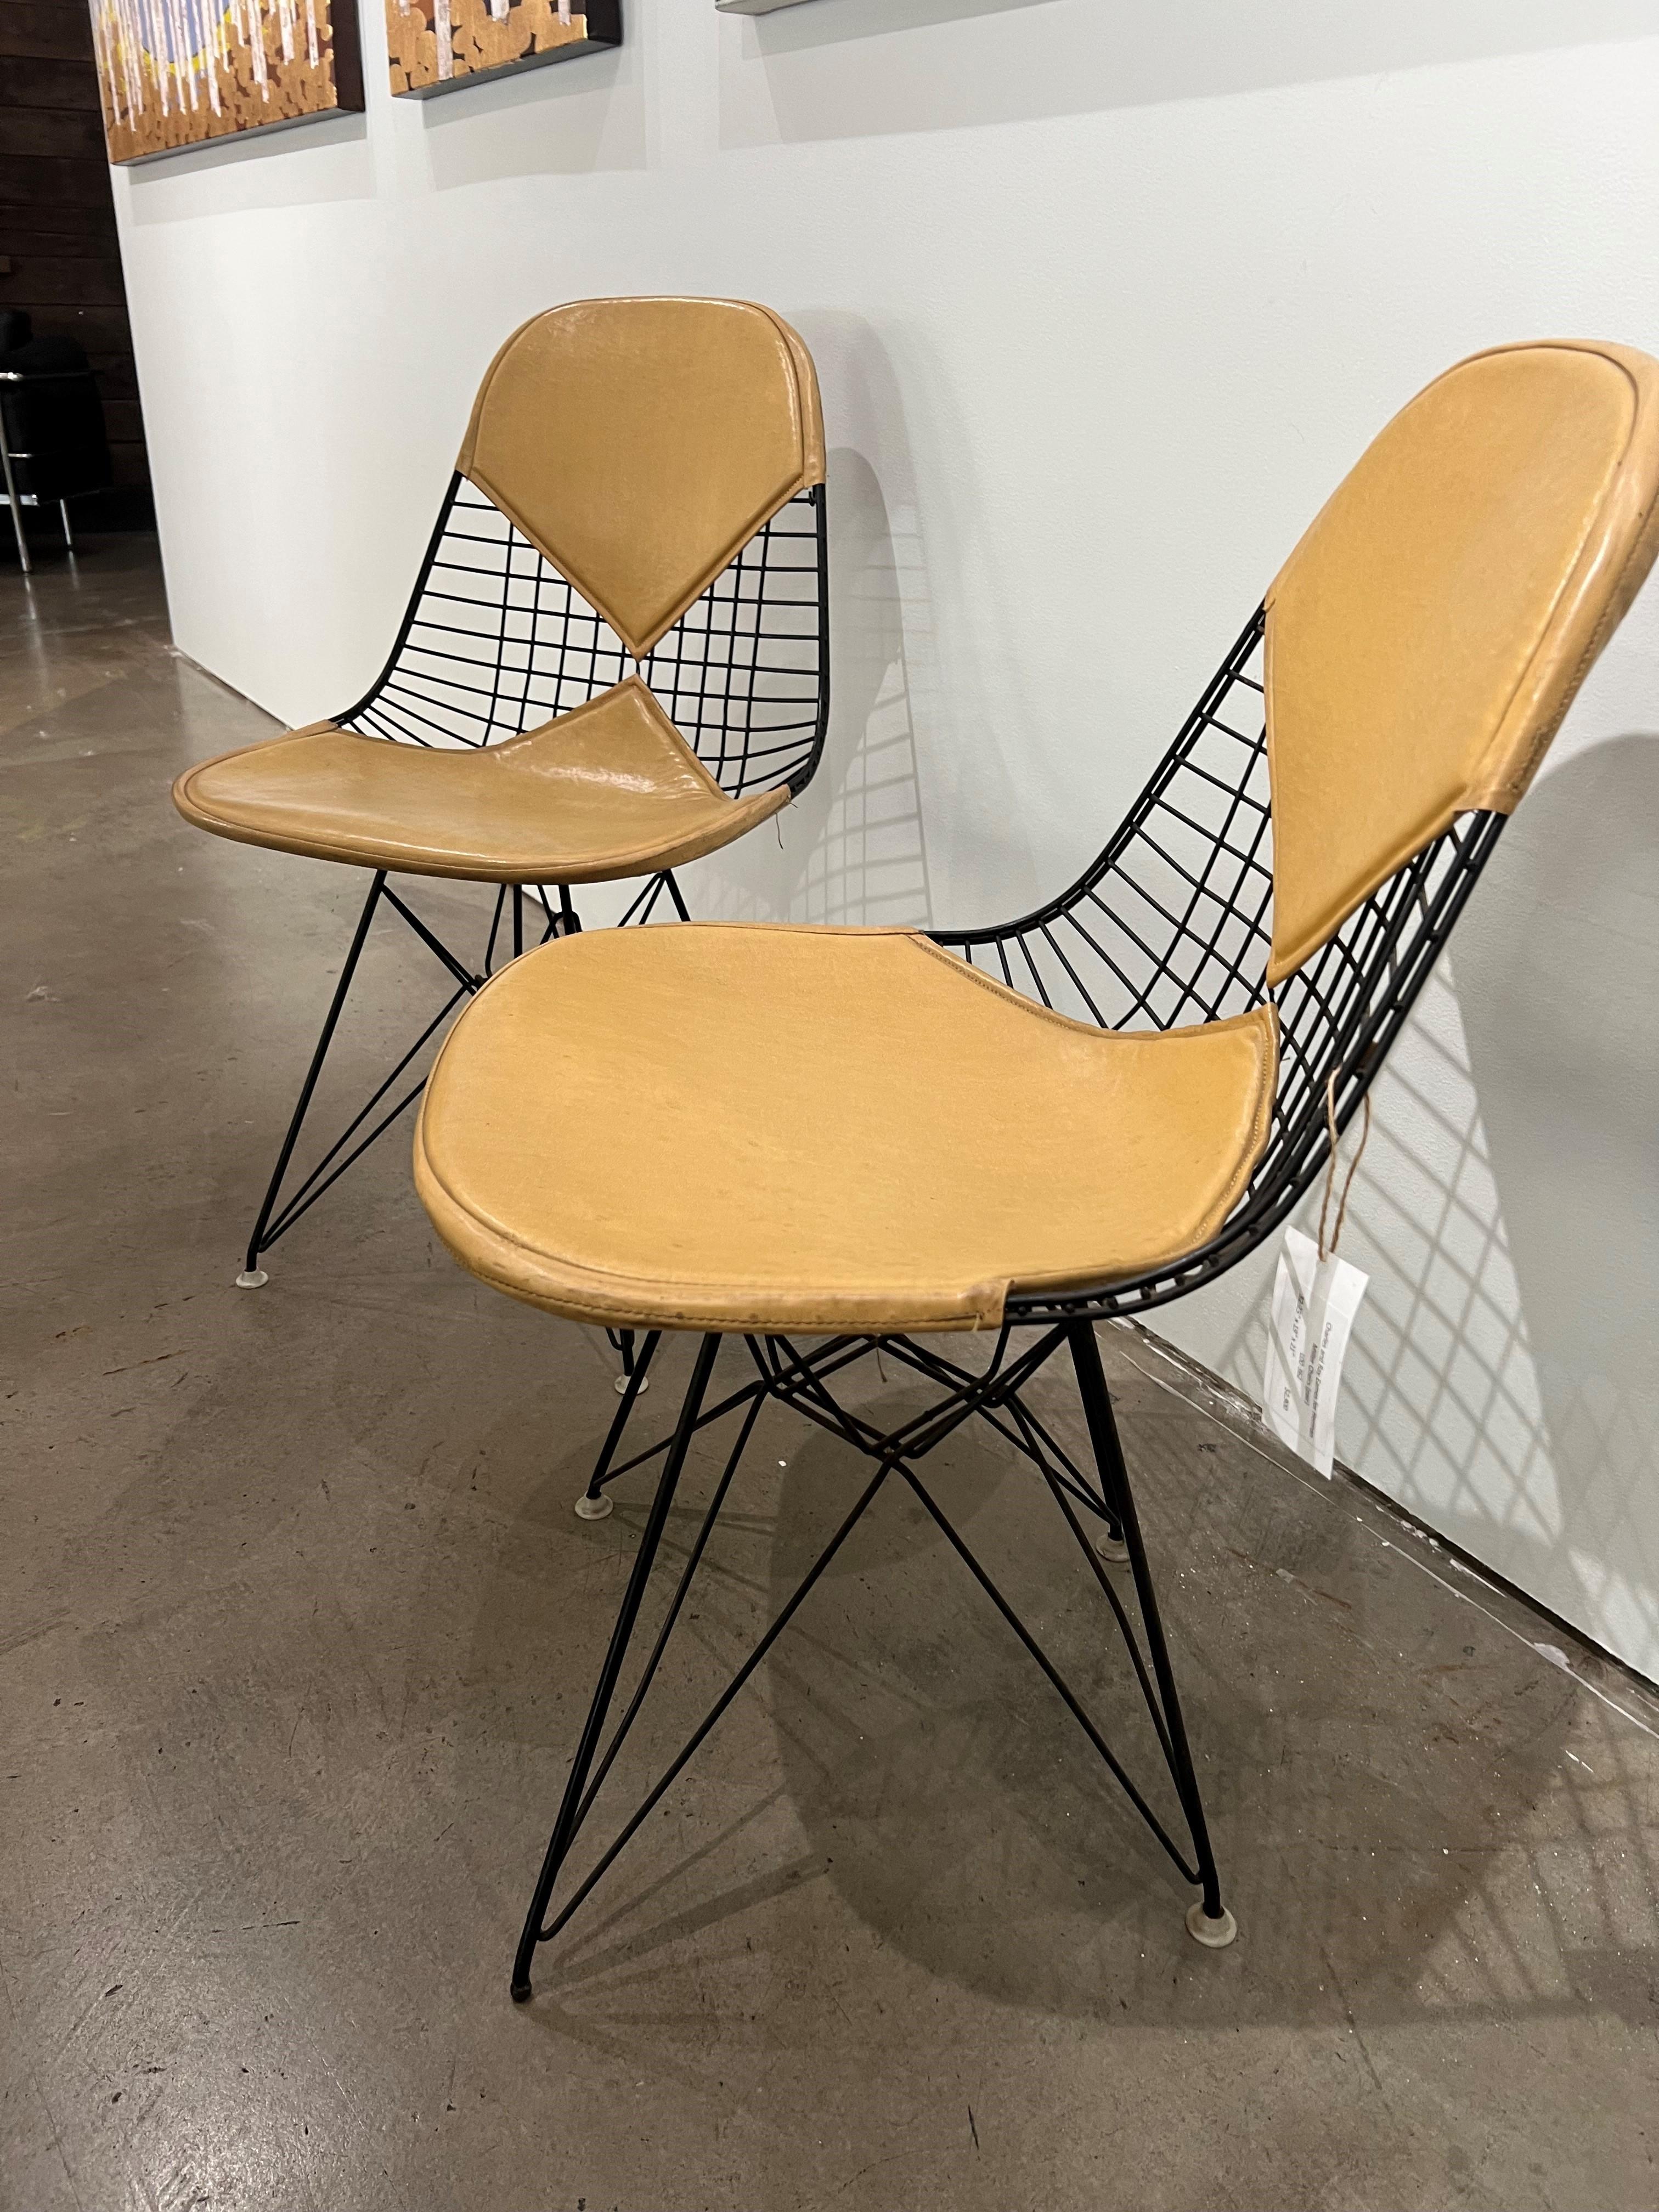 Step into the world of timeless design with the iconic creations of Charles and Ray Eames for Herman Miller chairs. Renowned for their innovative approach, the Eameses revolutionized the concept of seating, combining functionality, comfort, and